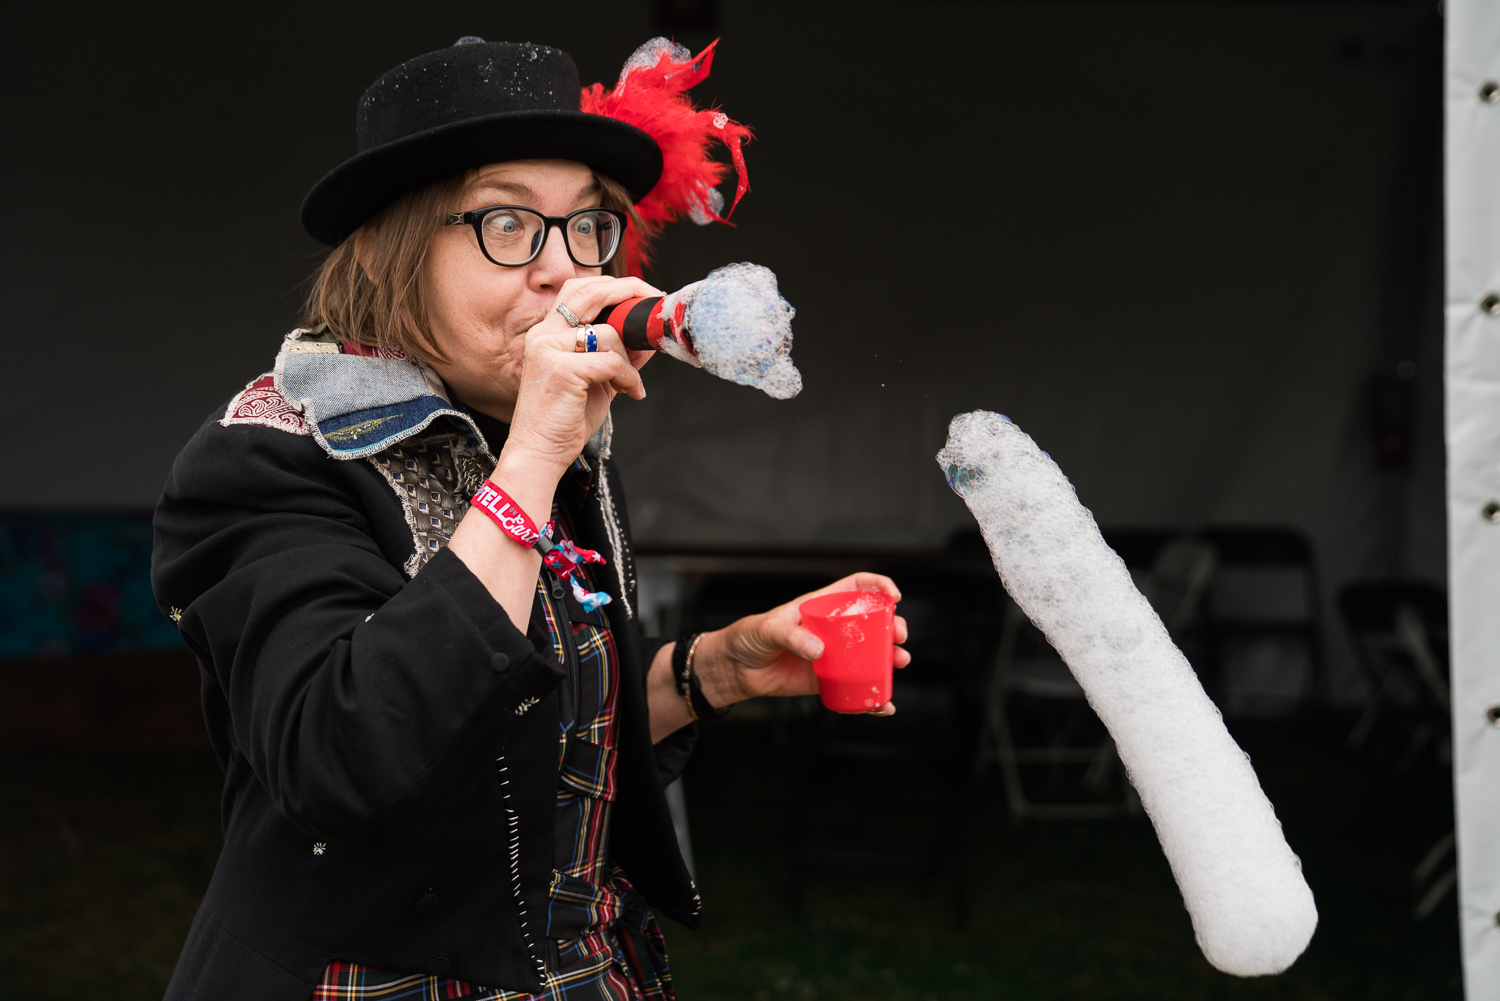 Woman in vintage dress wearing a black hat with a red feather crosses eyes while blowing bubbles.